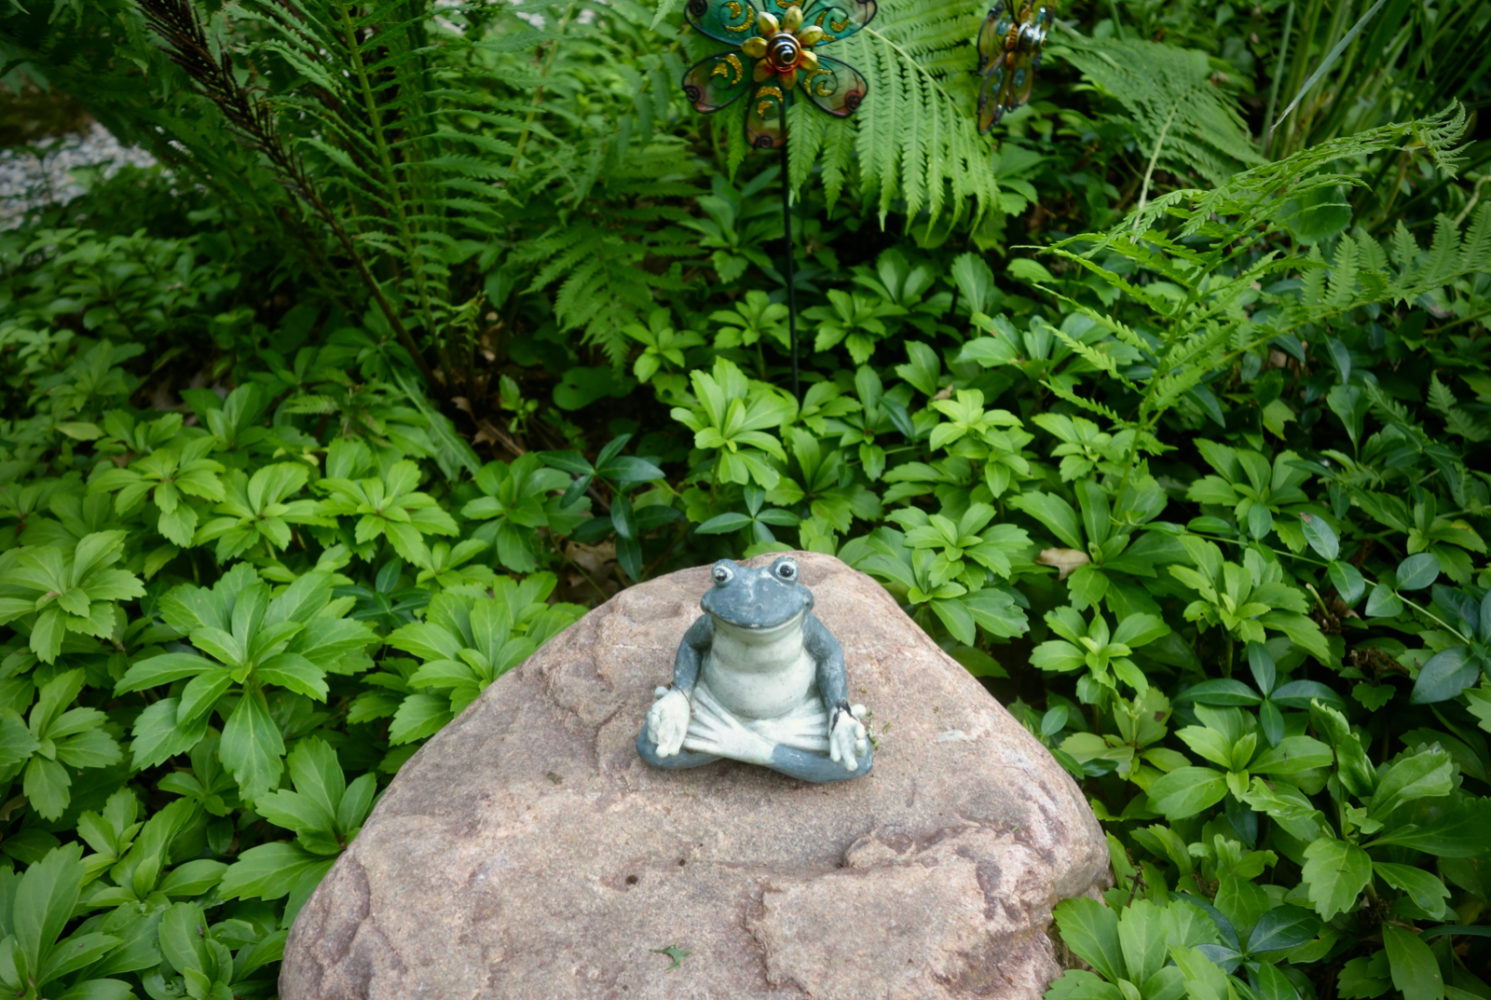 Sue's frog meditating in our neighbor's fish pond